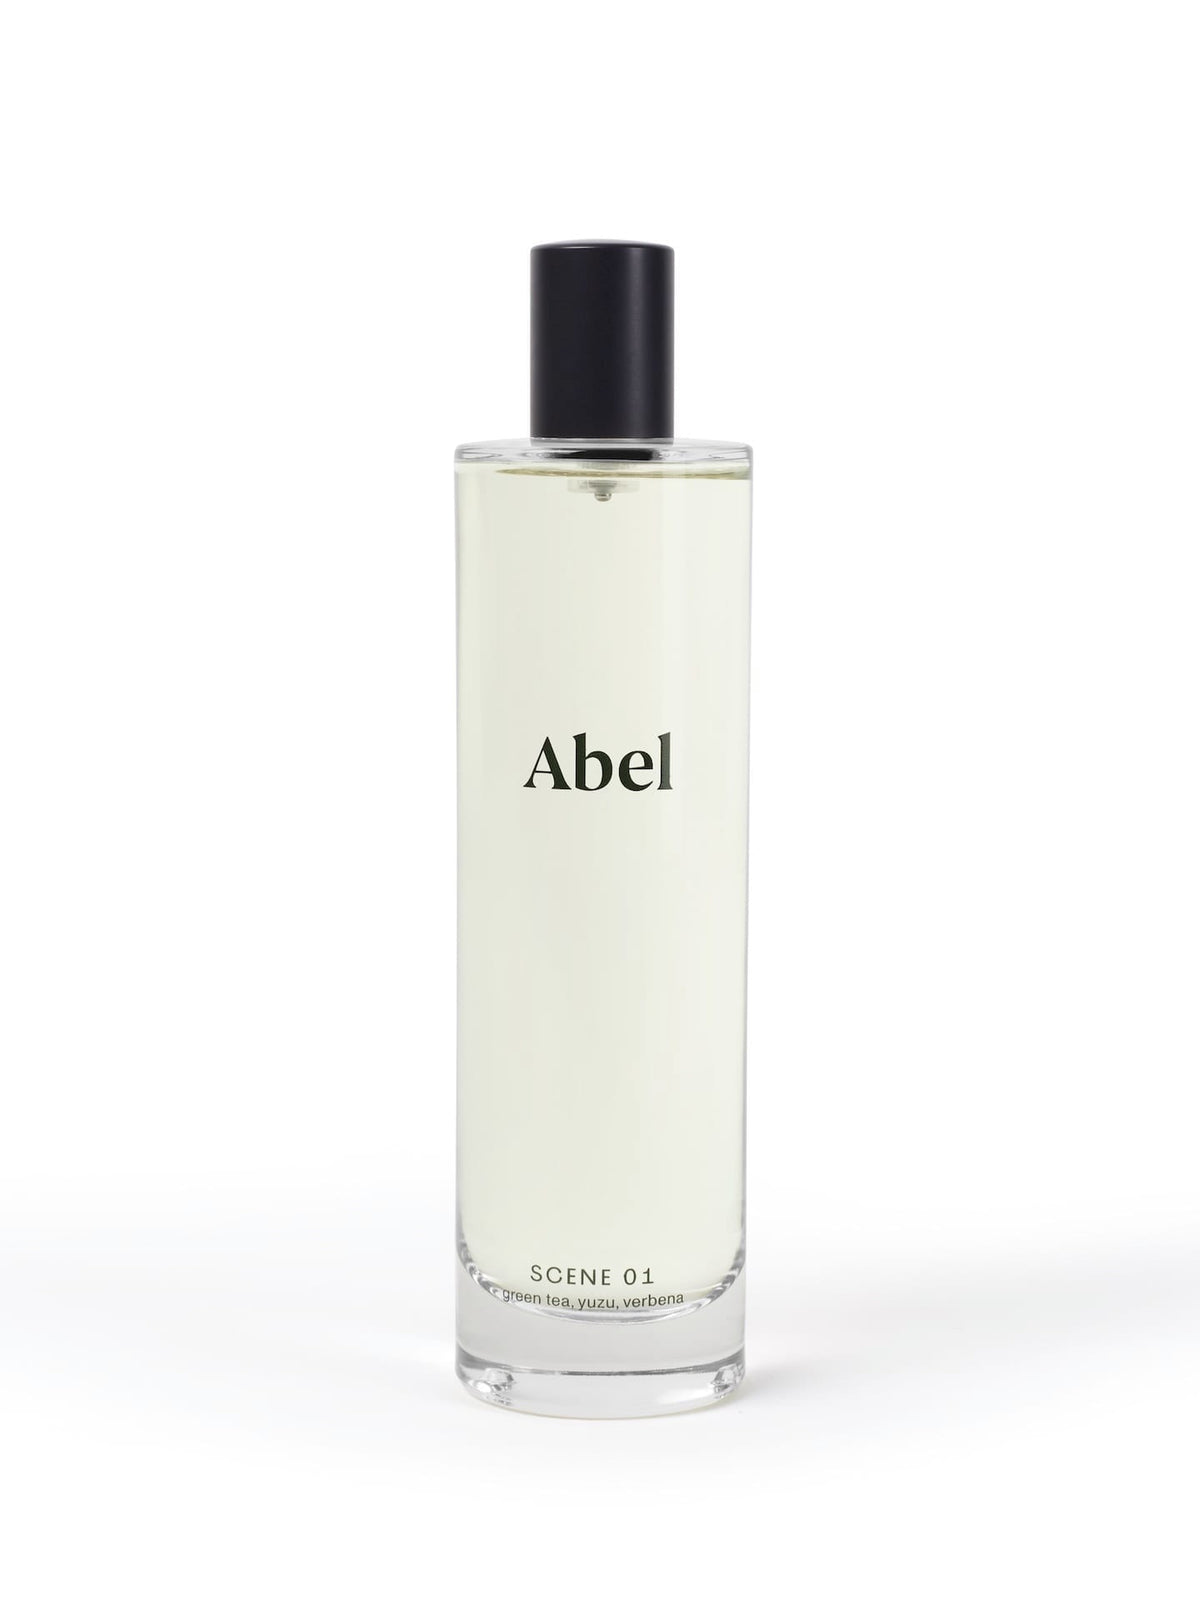 A transparent glass perfume bottle labeled &quot;Abel&quot; containing Room Spray – Scene 01 ⋅ green tea, yuzu, verbena on a white background.